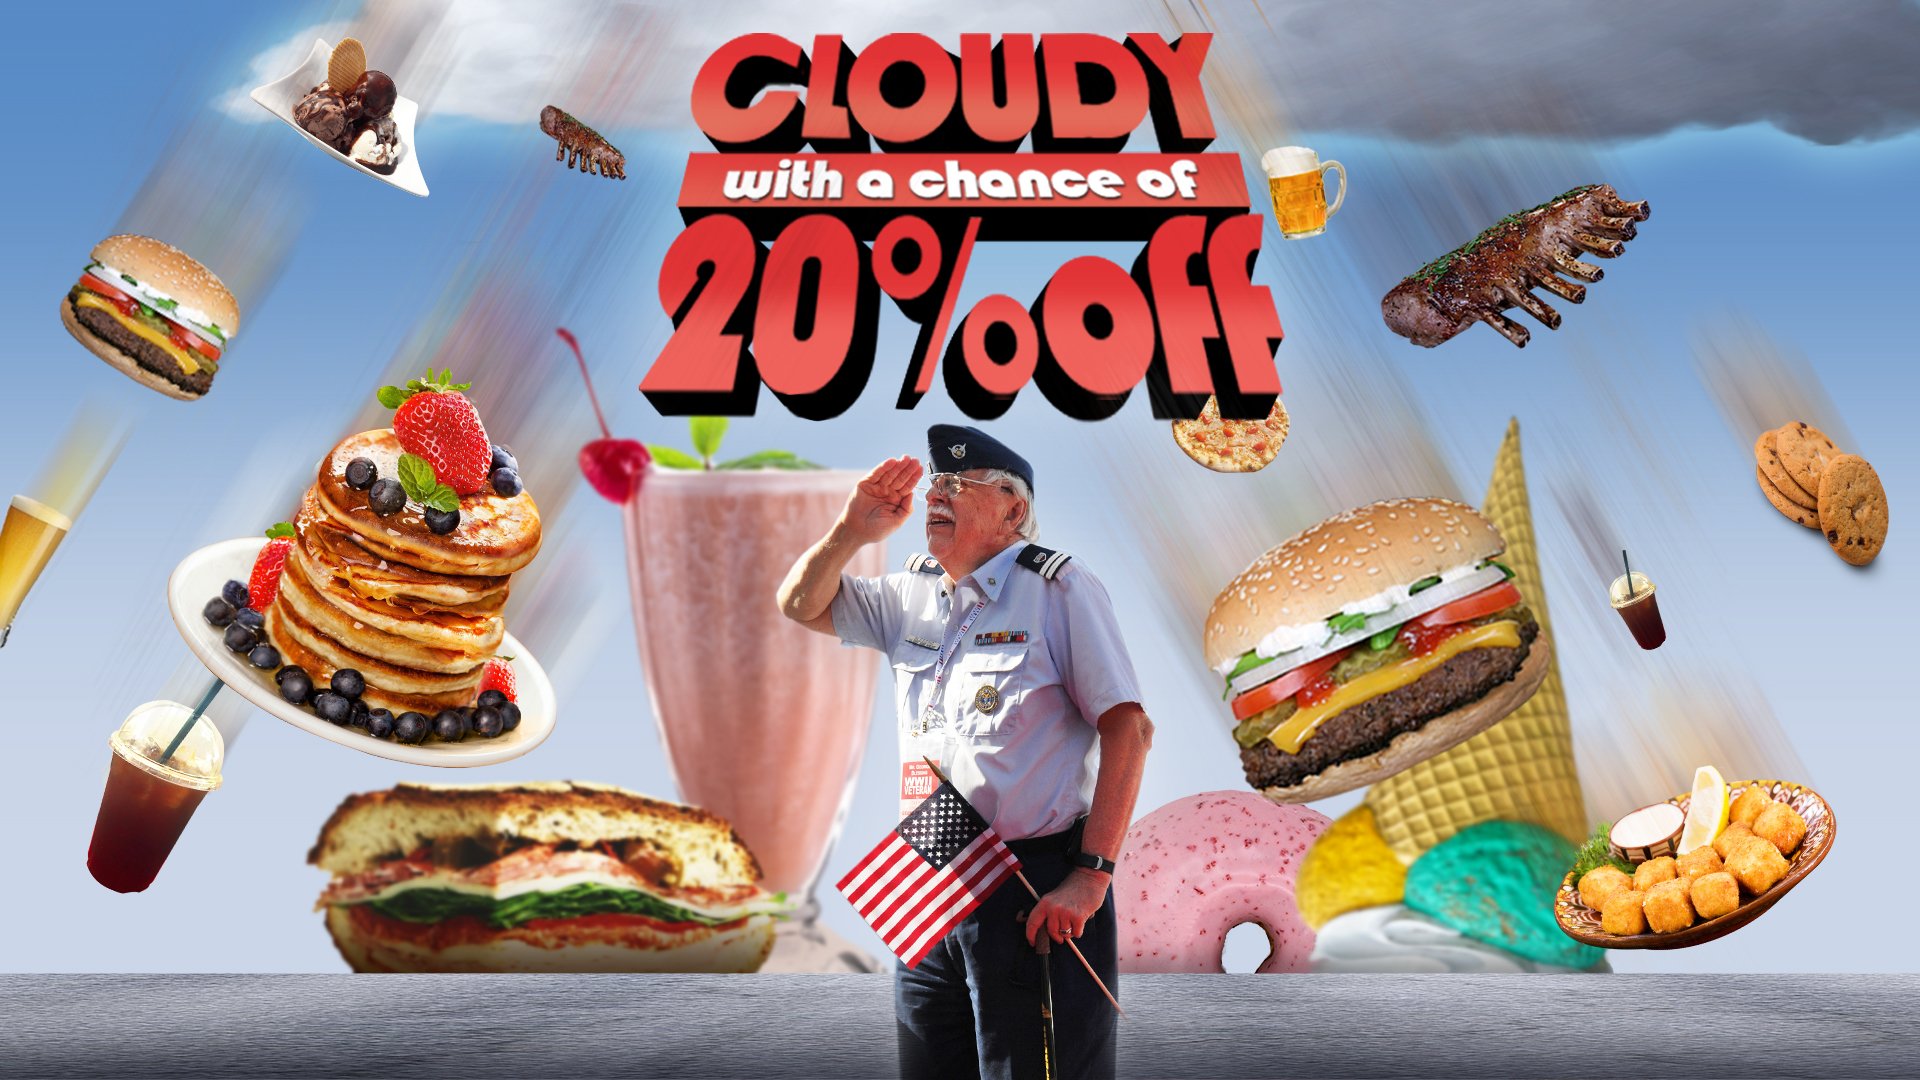 Cloudy with a chance of 20 percent off for all these Veterans Day deals. Composite by Coffee or Die Magazine.